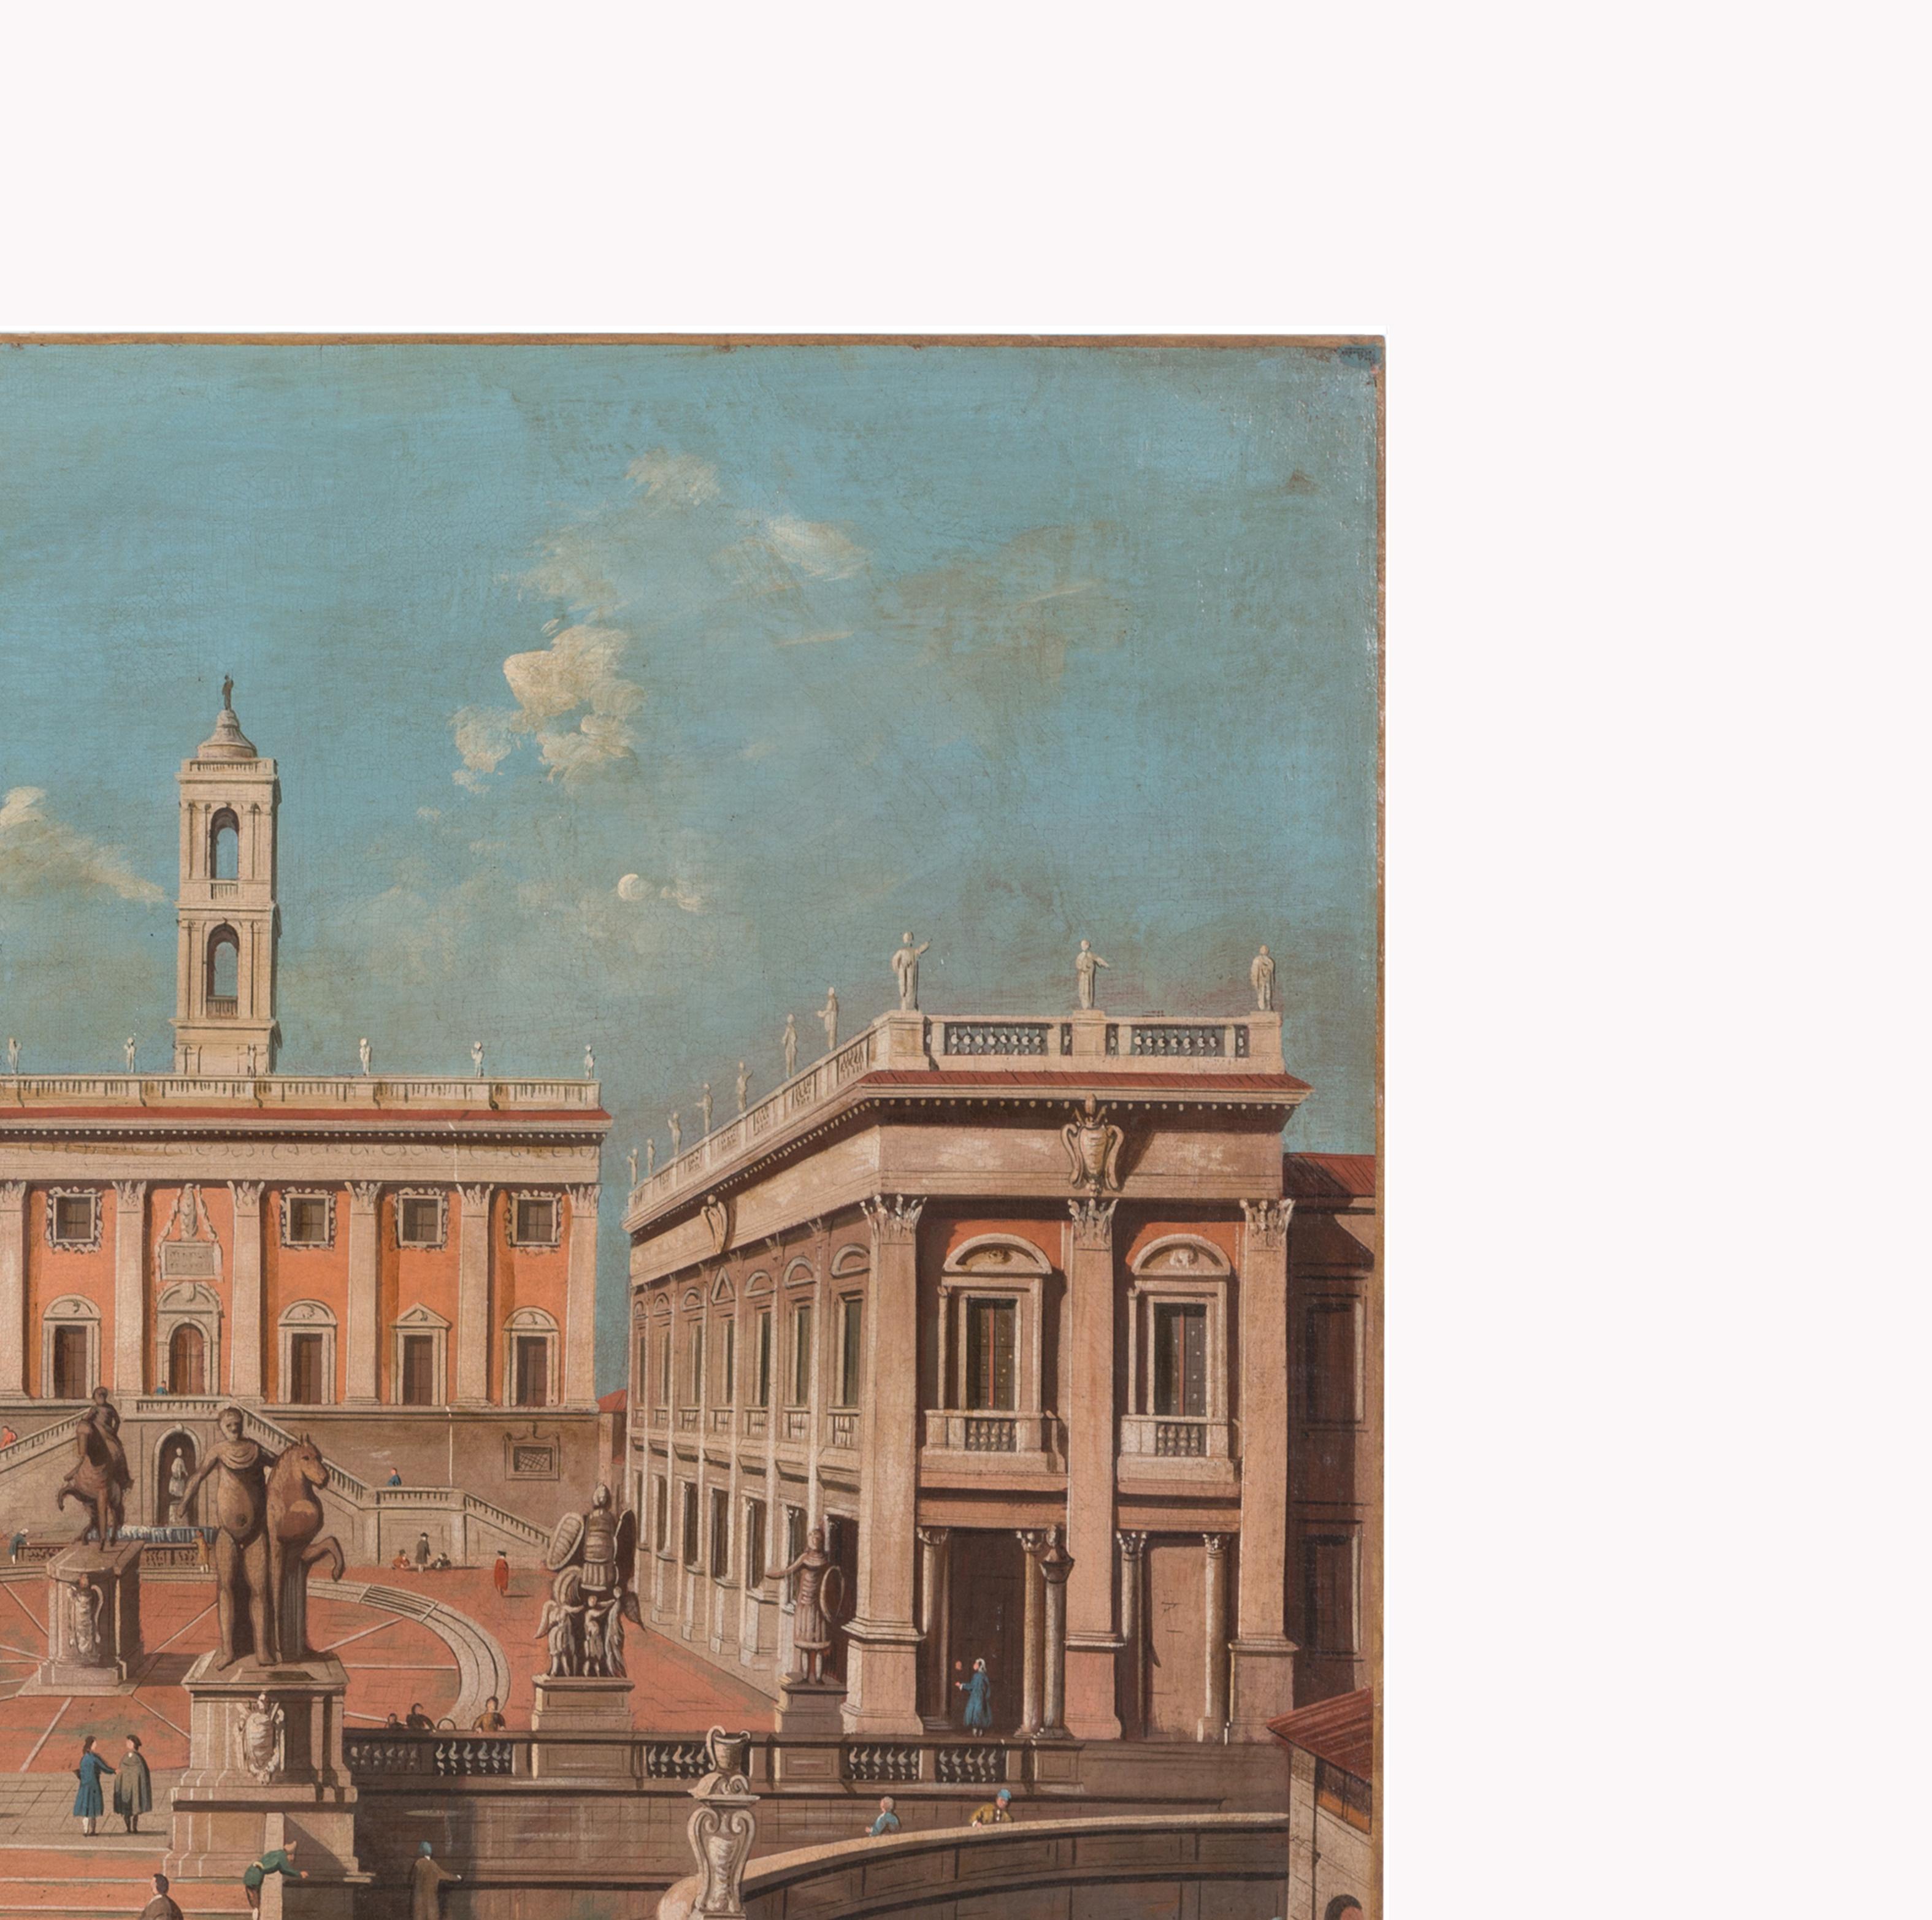 This refined view made by a Venetian master of the late 18th-early 19th century, animated by numerous characters and carriages in the foreground, highlights the very famous Piazza del Campidoglio. in addition to the characters, in the foreground